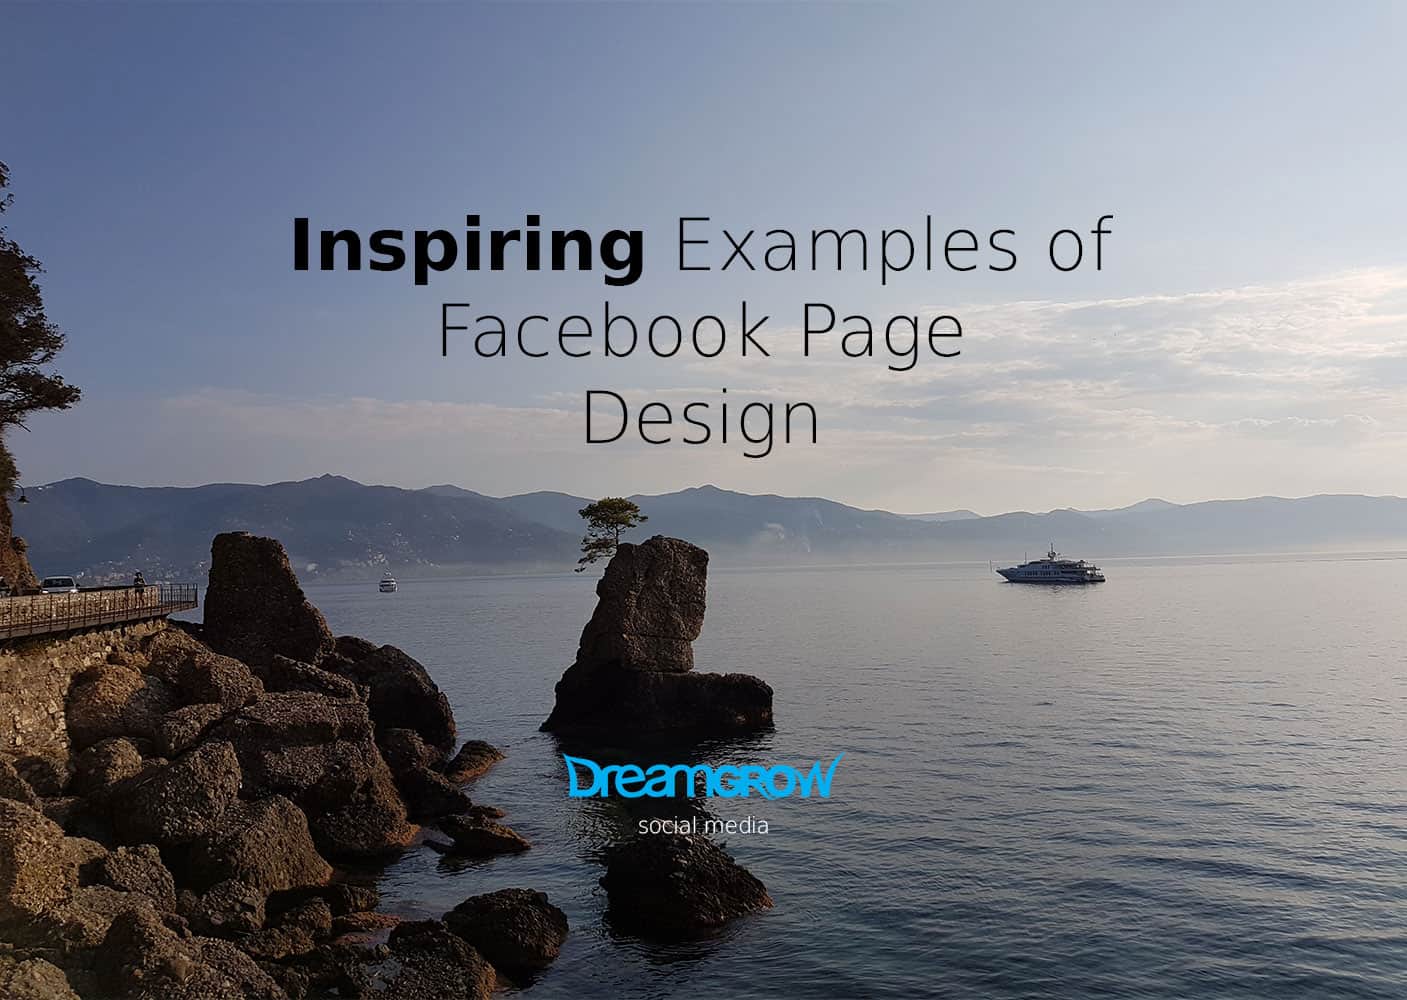 Facebook page design examples